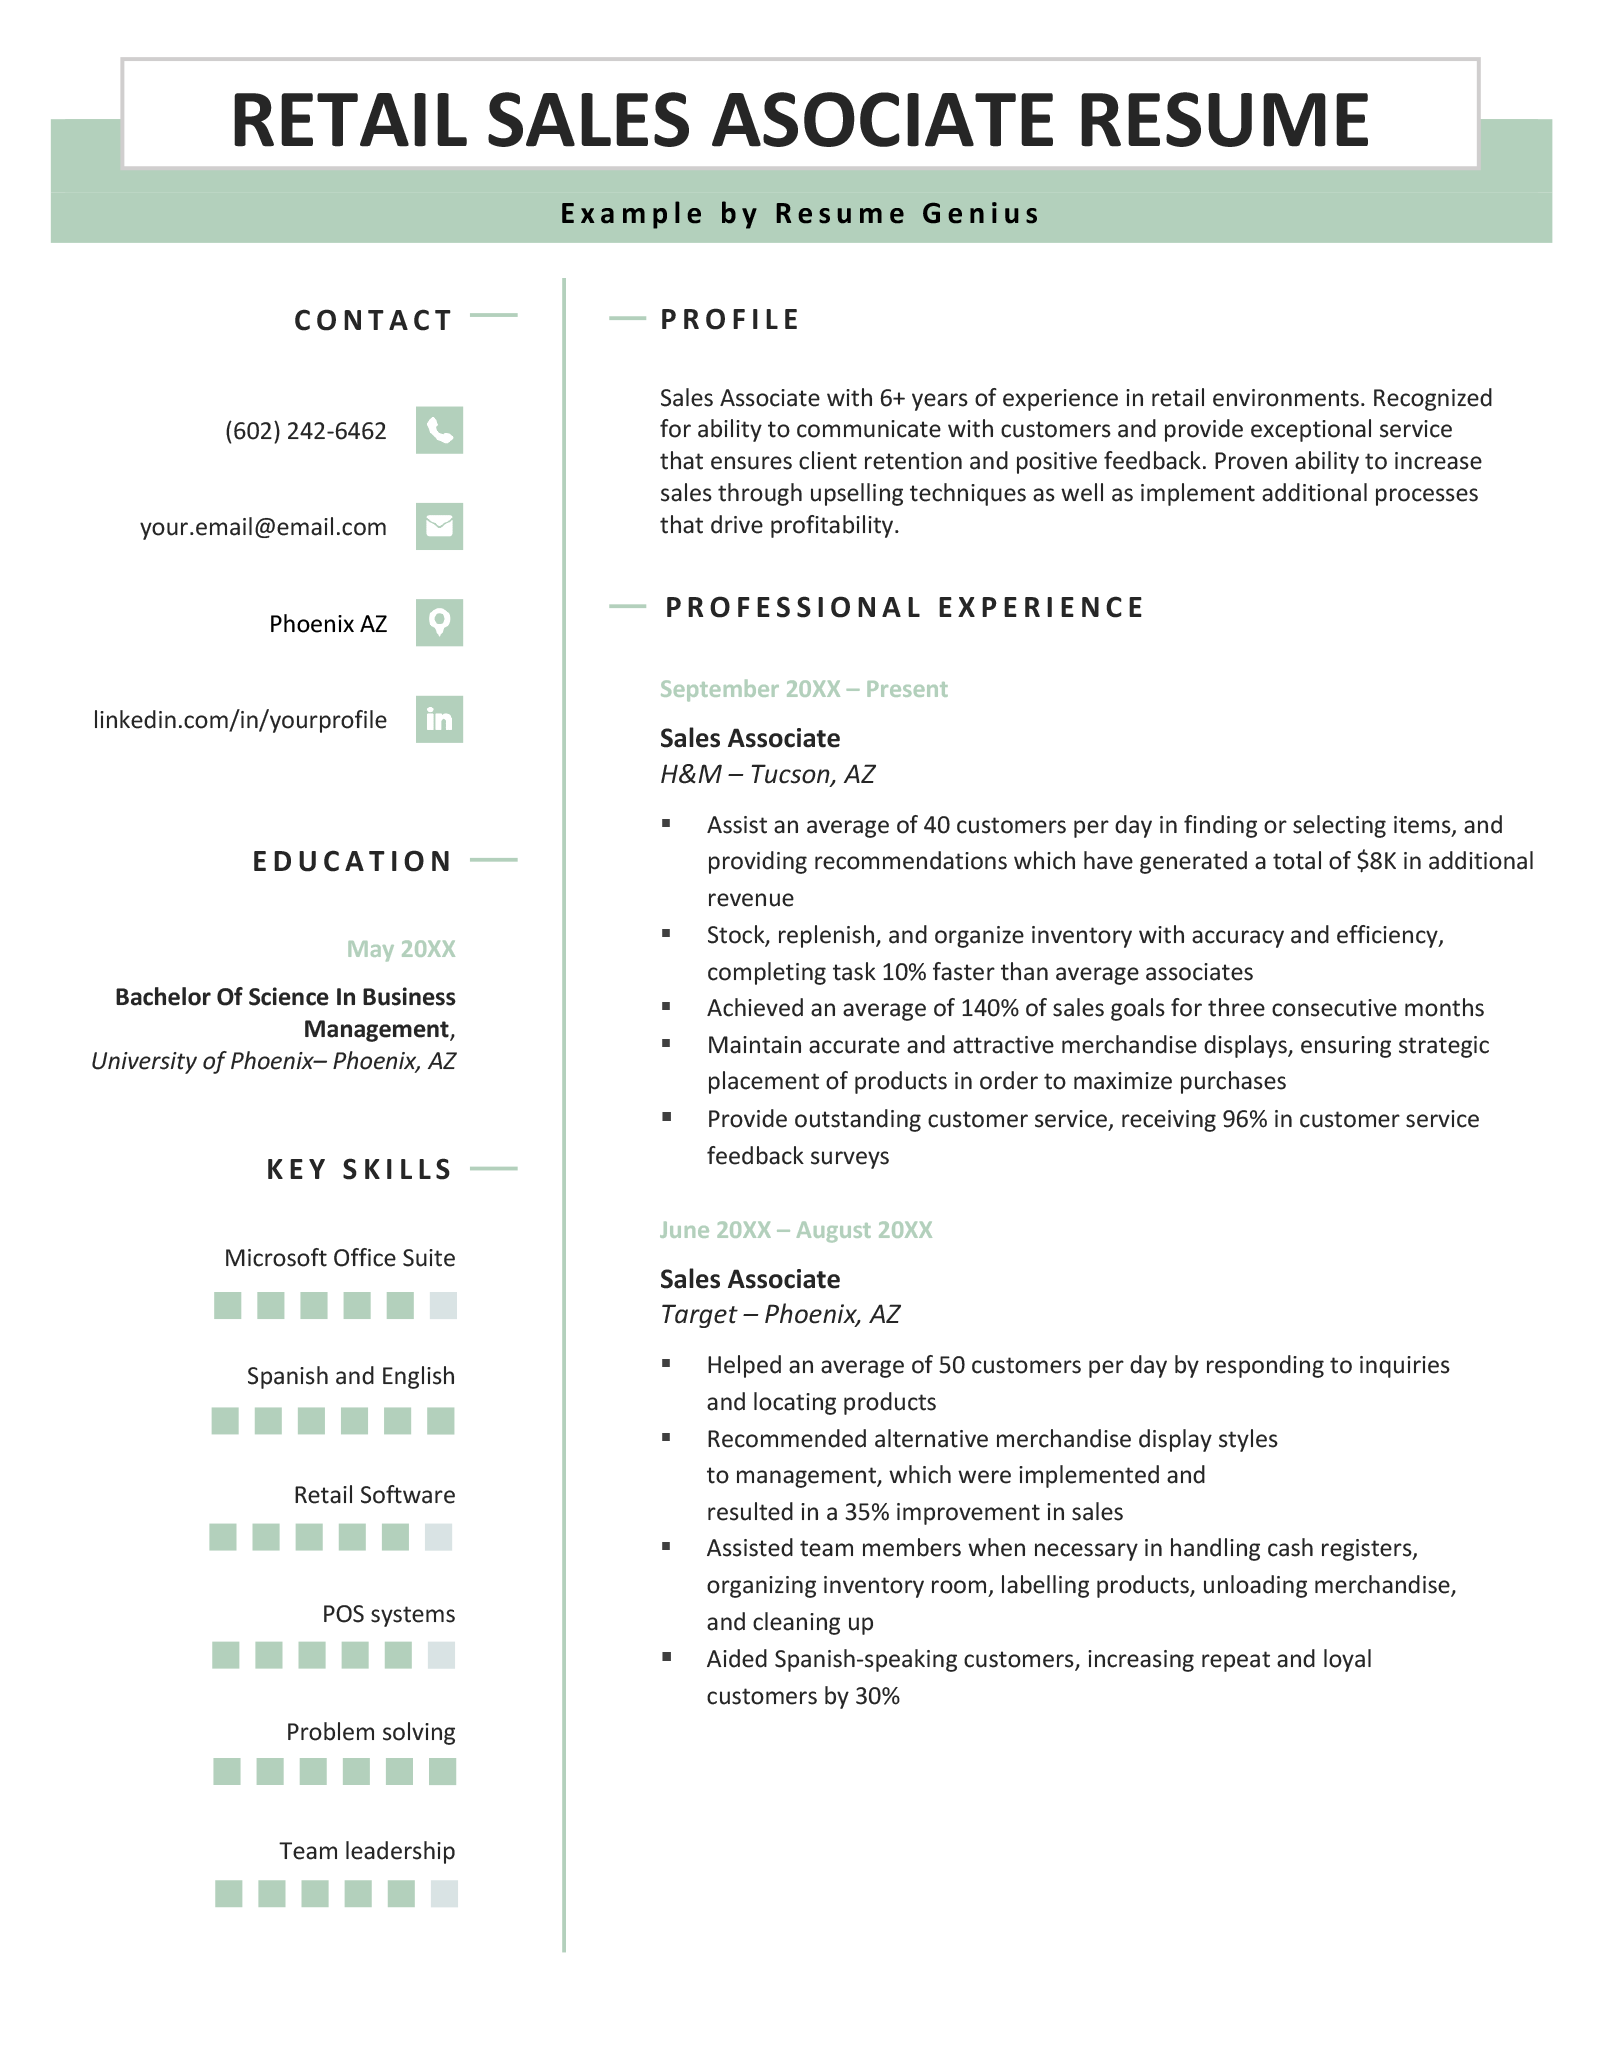 Example of a retail sales associate resume.